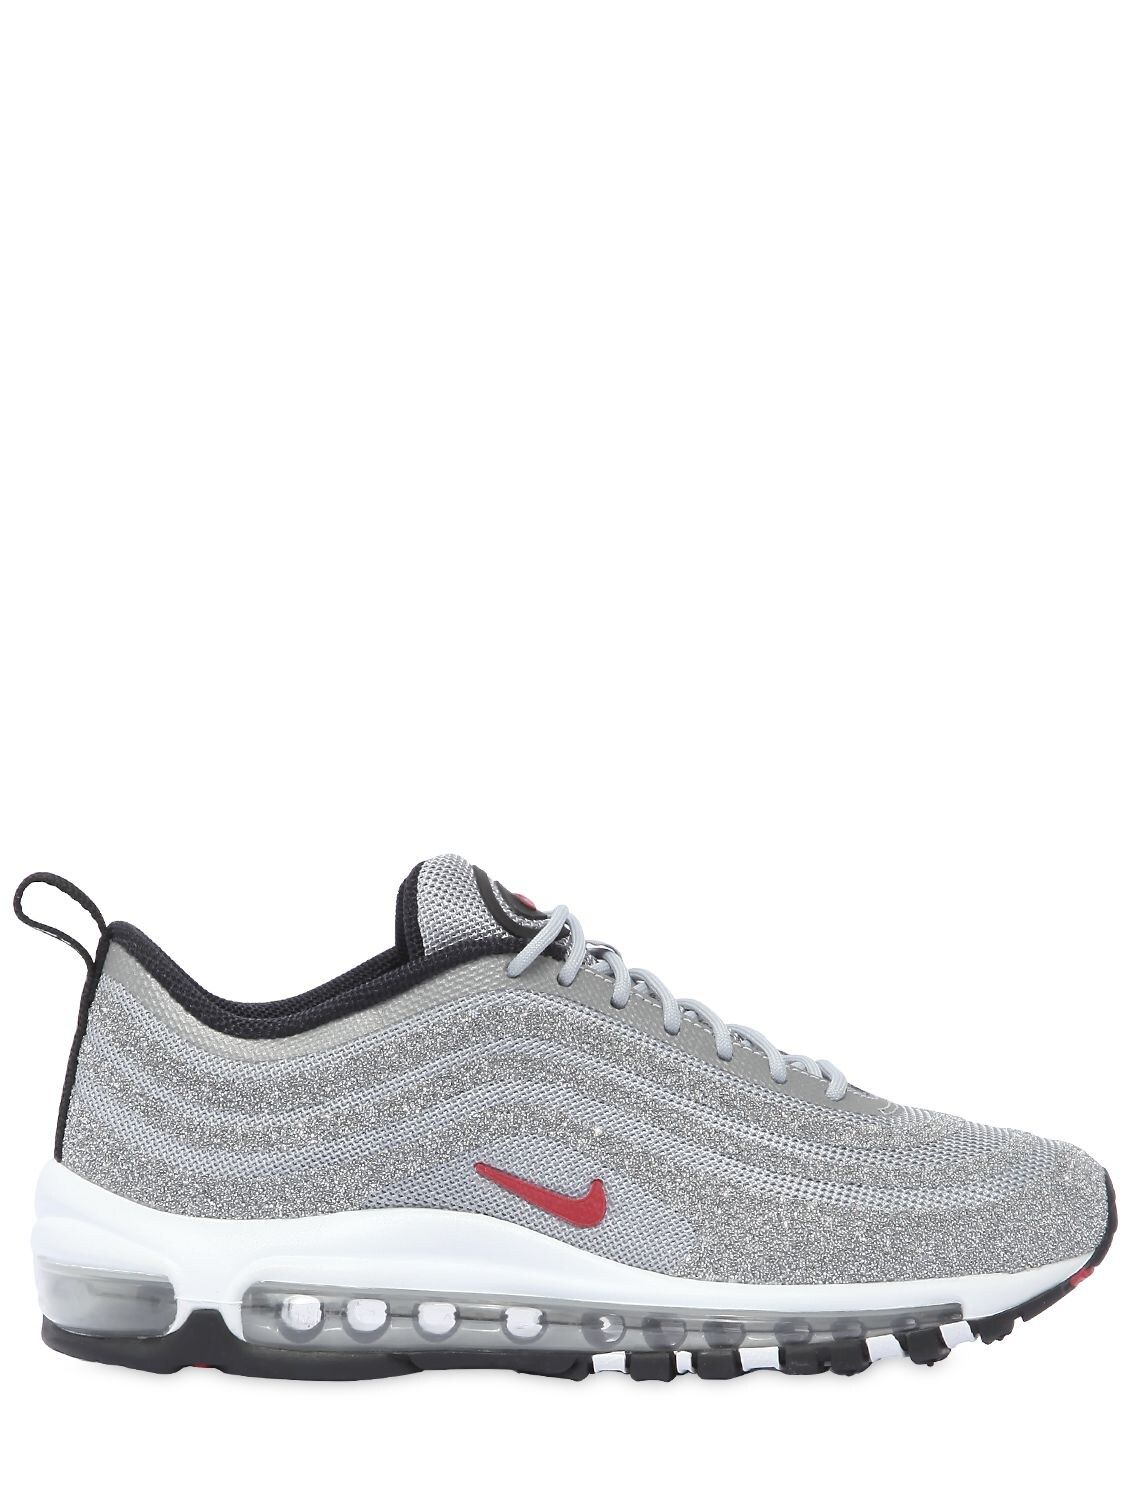 AIR MAX 97 LX FAUX LEATHER SNEAKERS | Luisaviaroma